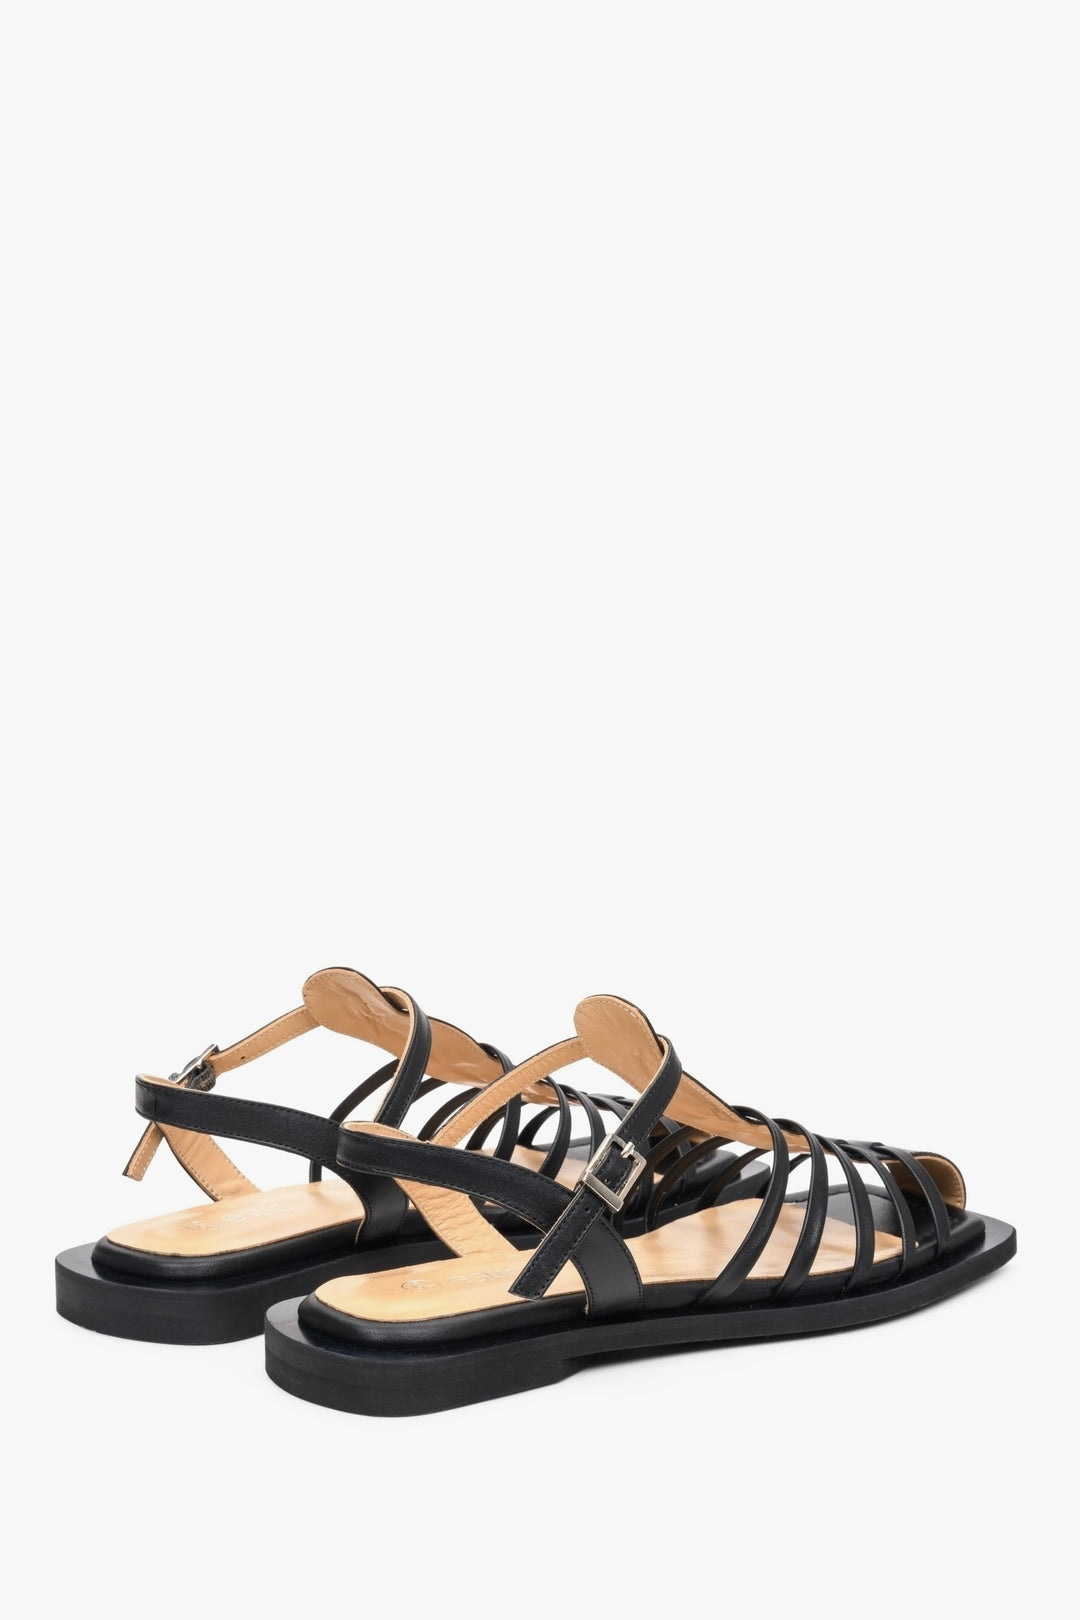 Leather black women's sandals with covered toe Estro - close-up on the sole of the shoes.